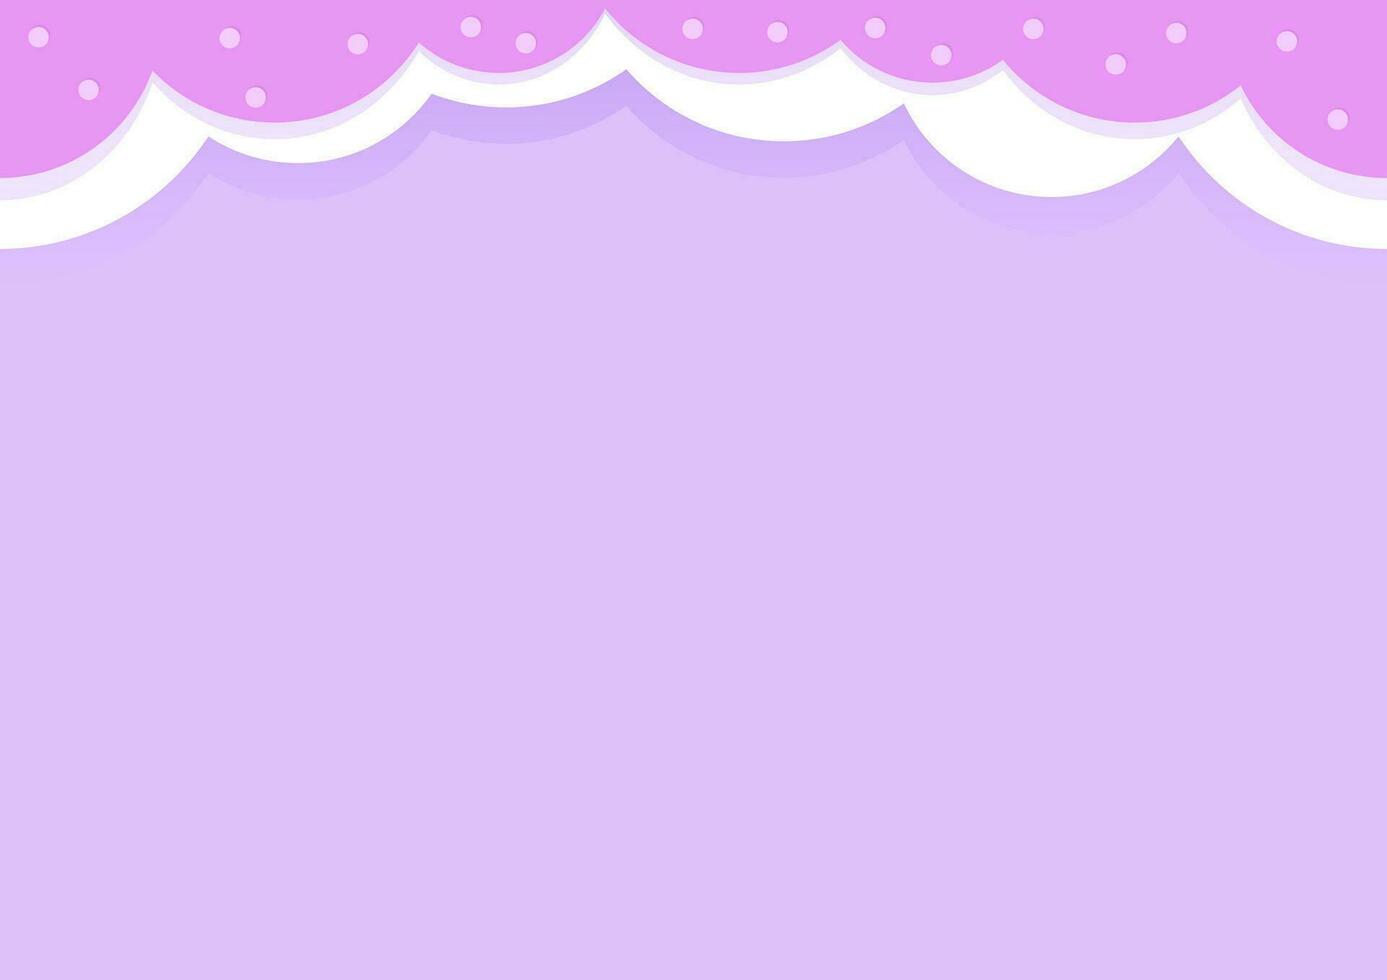 Purple background with pink seamless border on top and sweet beads vector